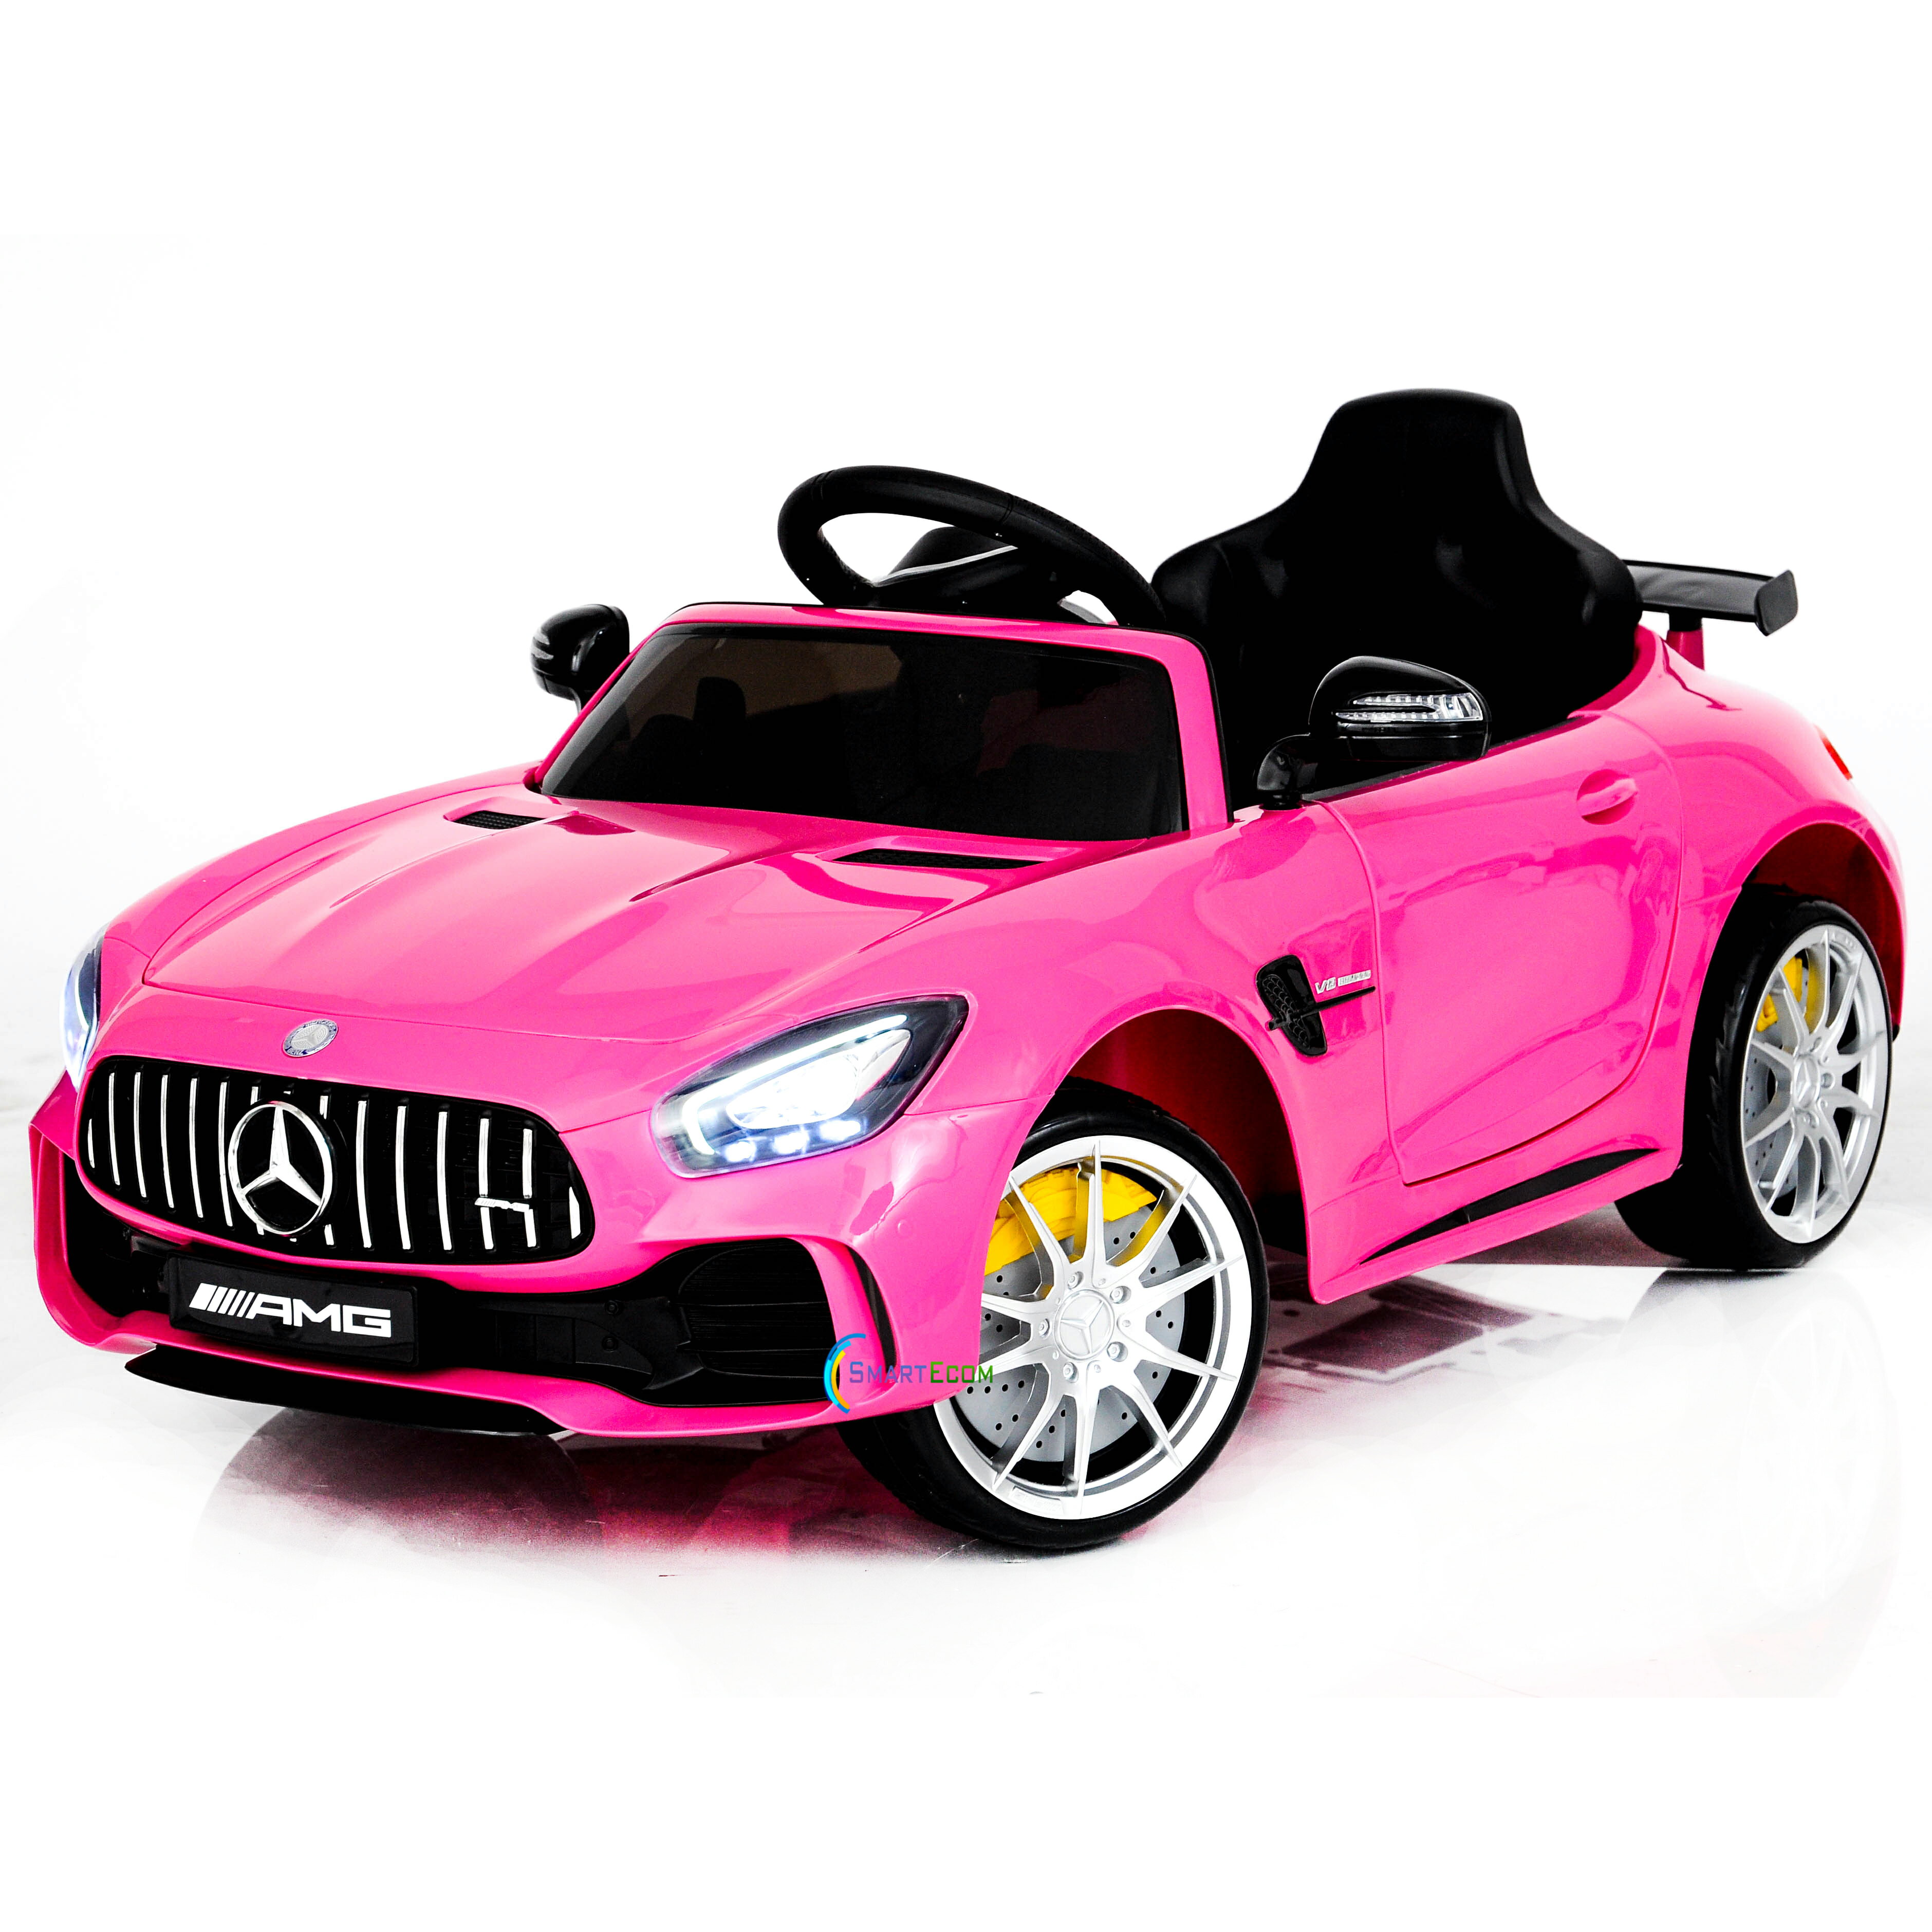 12 volt power wheels with remote control